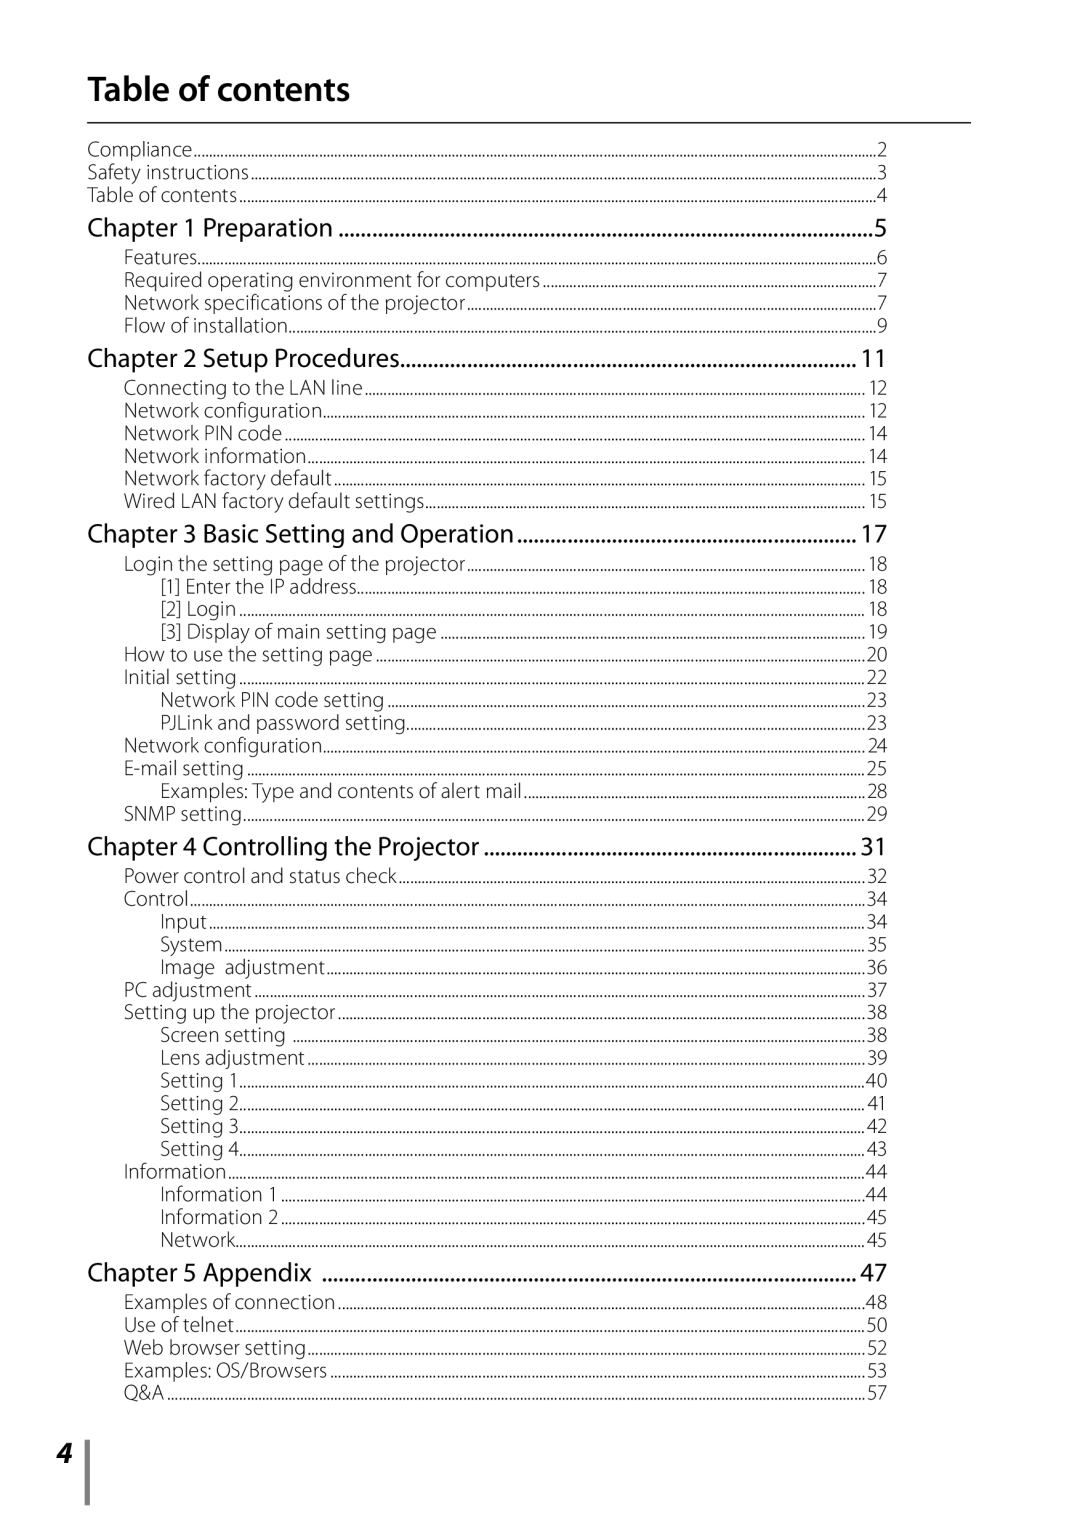 Sanyo owner manual Table of contents, Setup Procedures, Basic Setting and Operation, Controlling the Projector, Appendix 